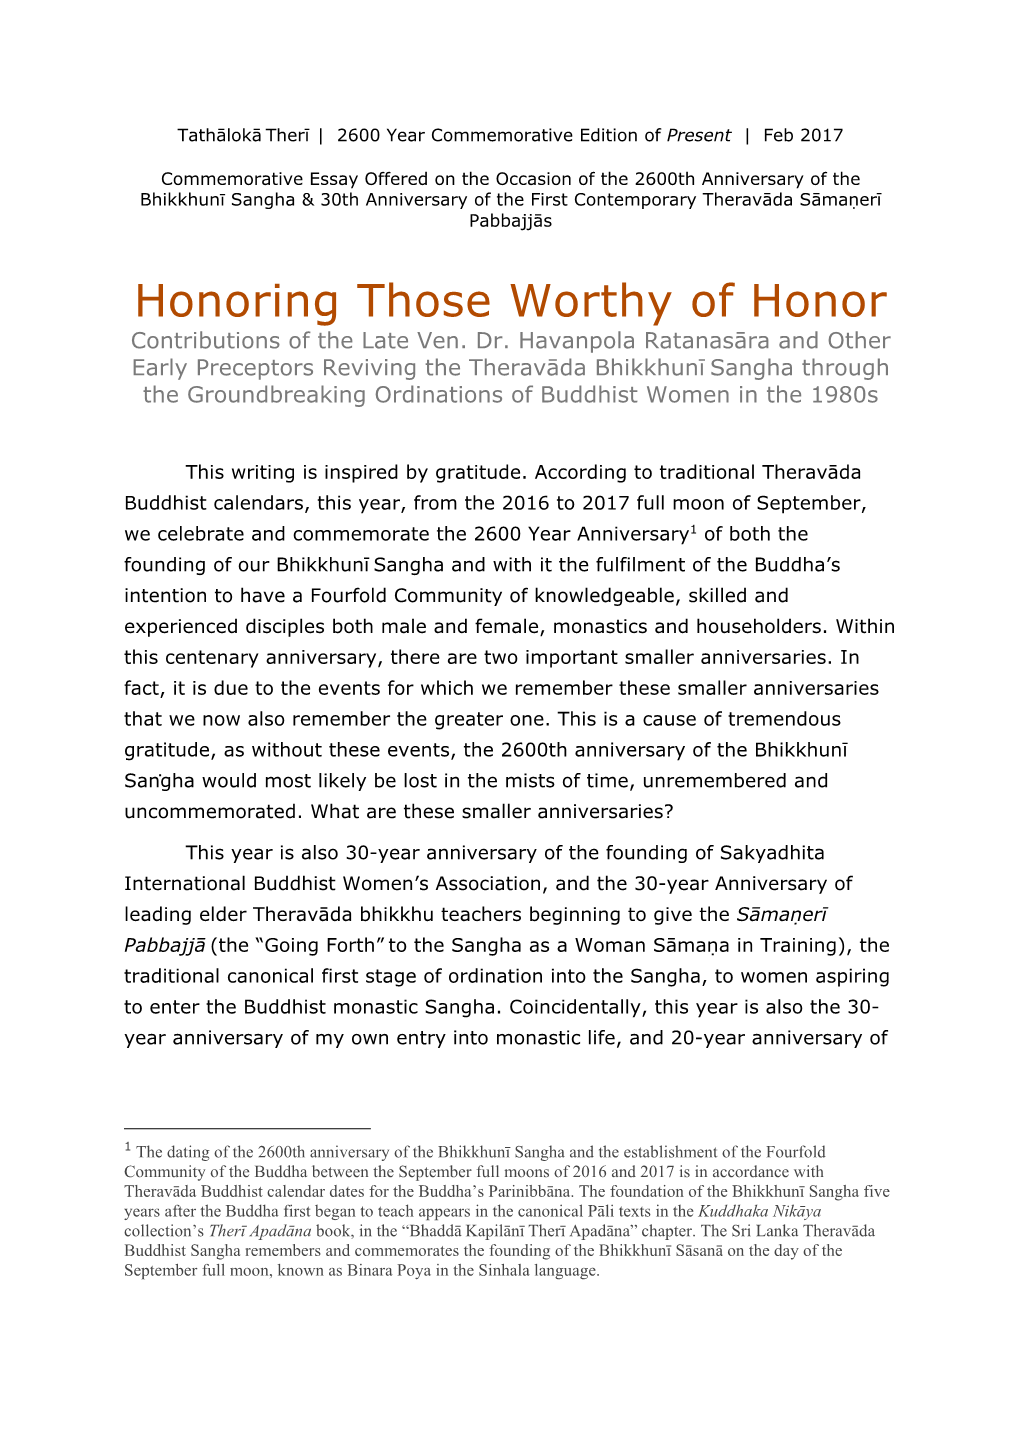 Honoring Those Worthy of Honor Contributions of the Late Ven